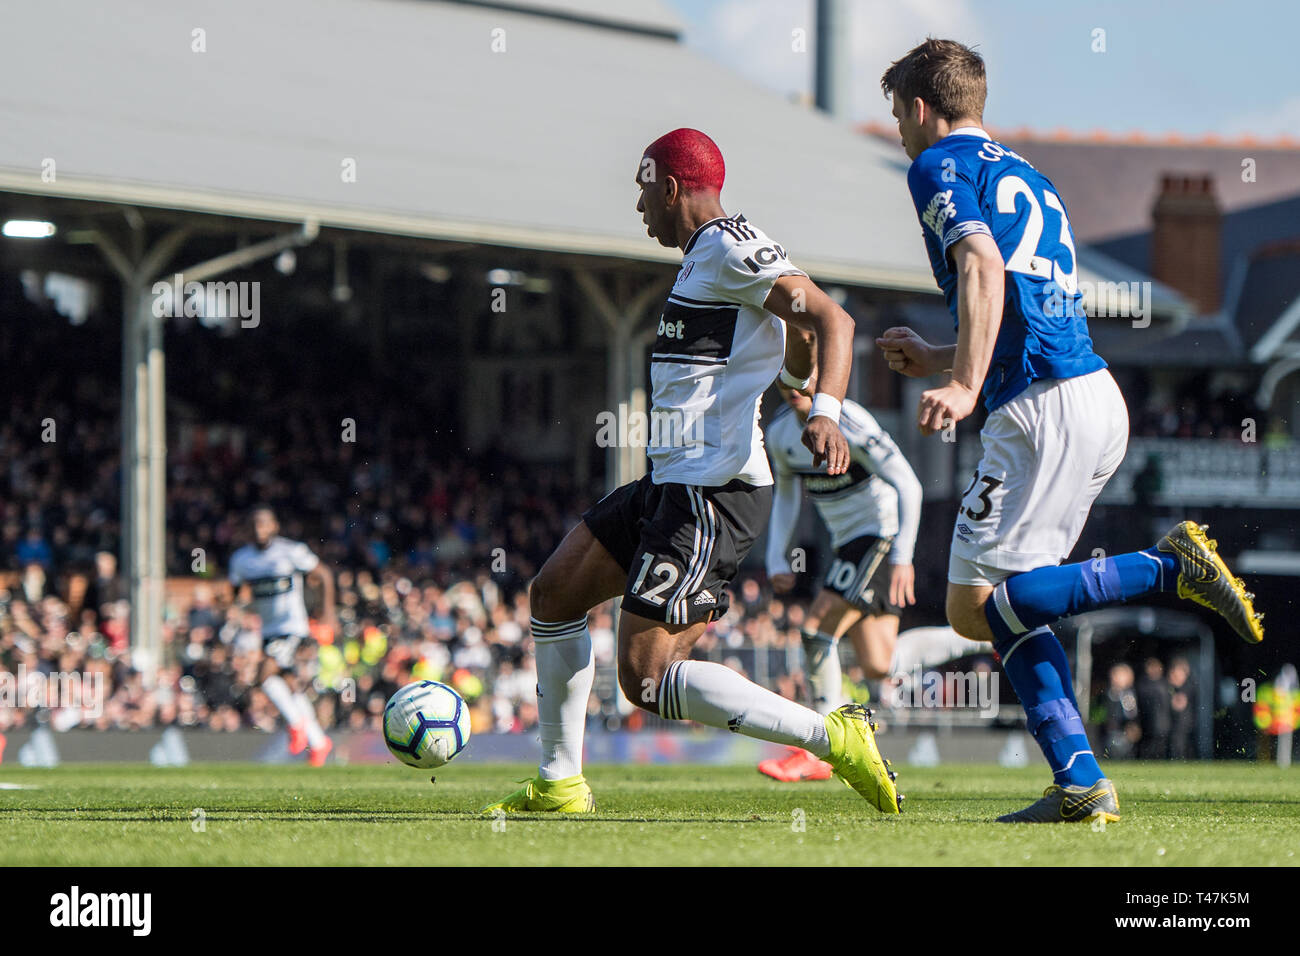 LONDON, ENGLAND - APRIL 13: Ryan Babel of Fulham FC passing ball to his team mate Tom Cairney during the Premier League match between Fulham FC and Everton FC at Craven Cottage on April 13, 2019 in London, United Kingdom. (Photo by Sebastian Frej/MB Media) Stock Photo